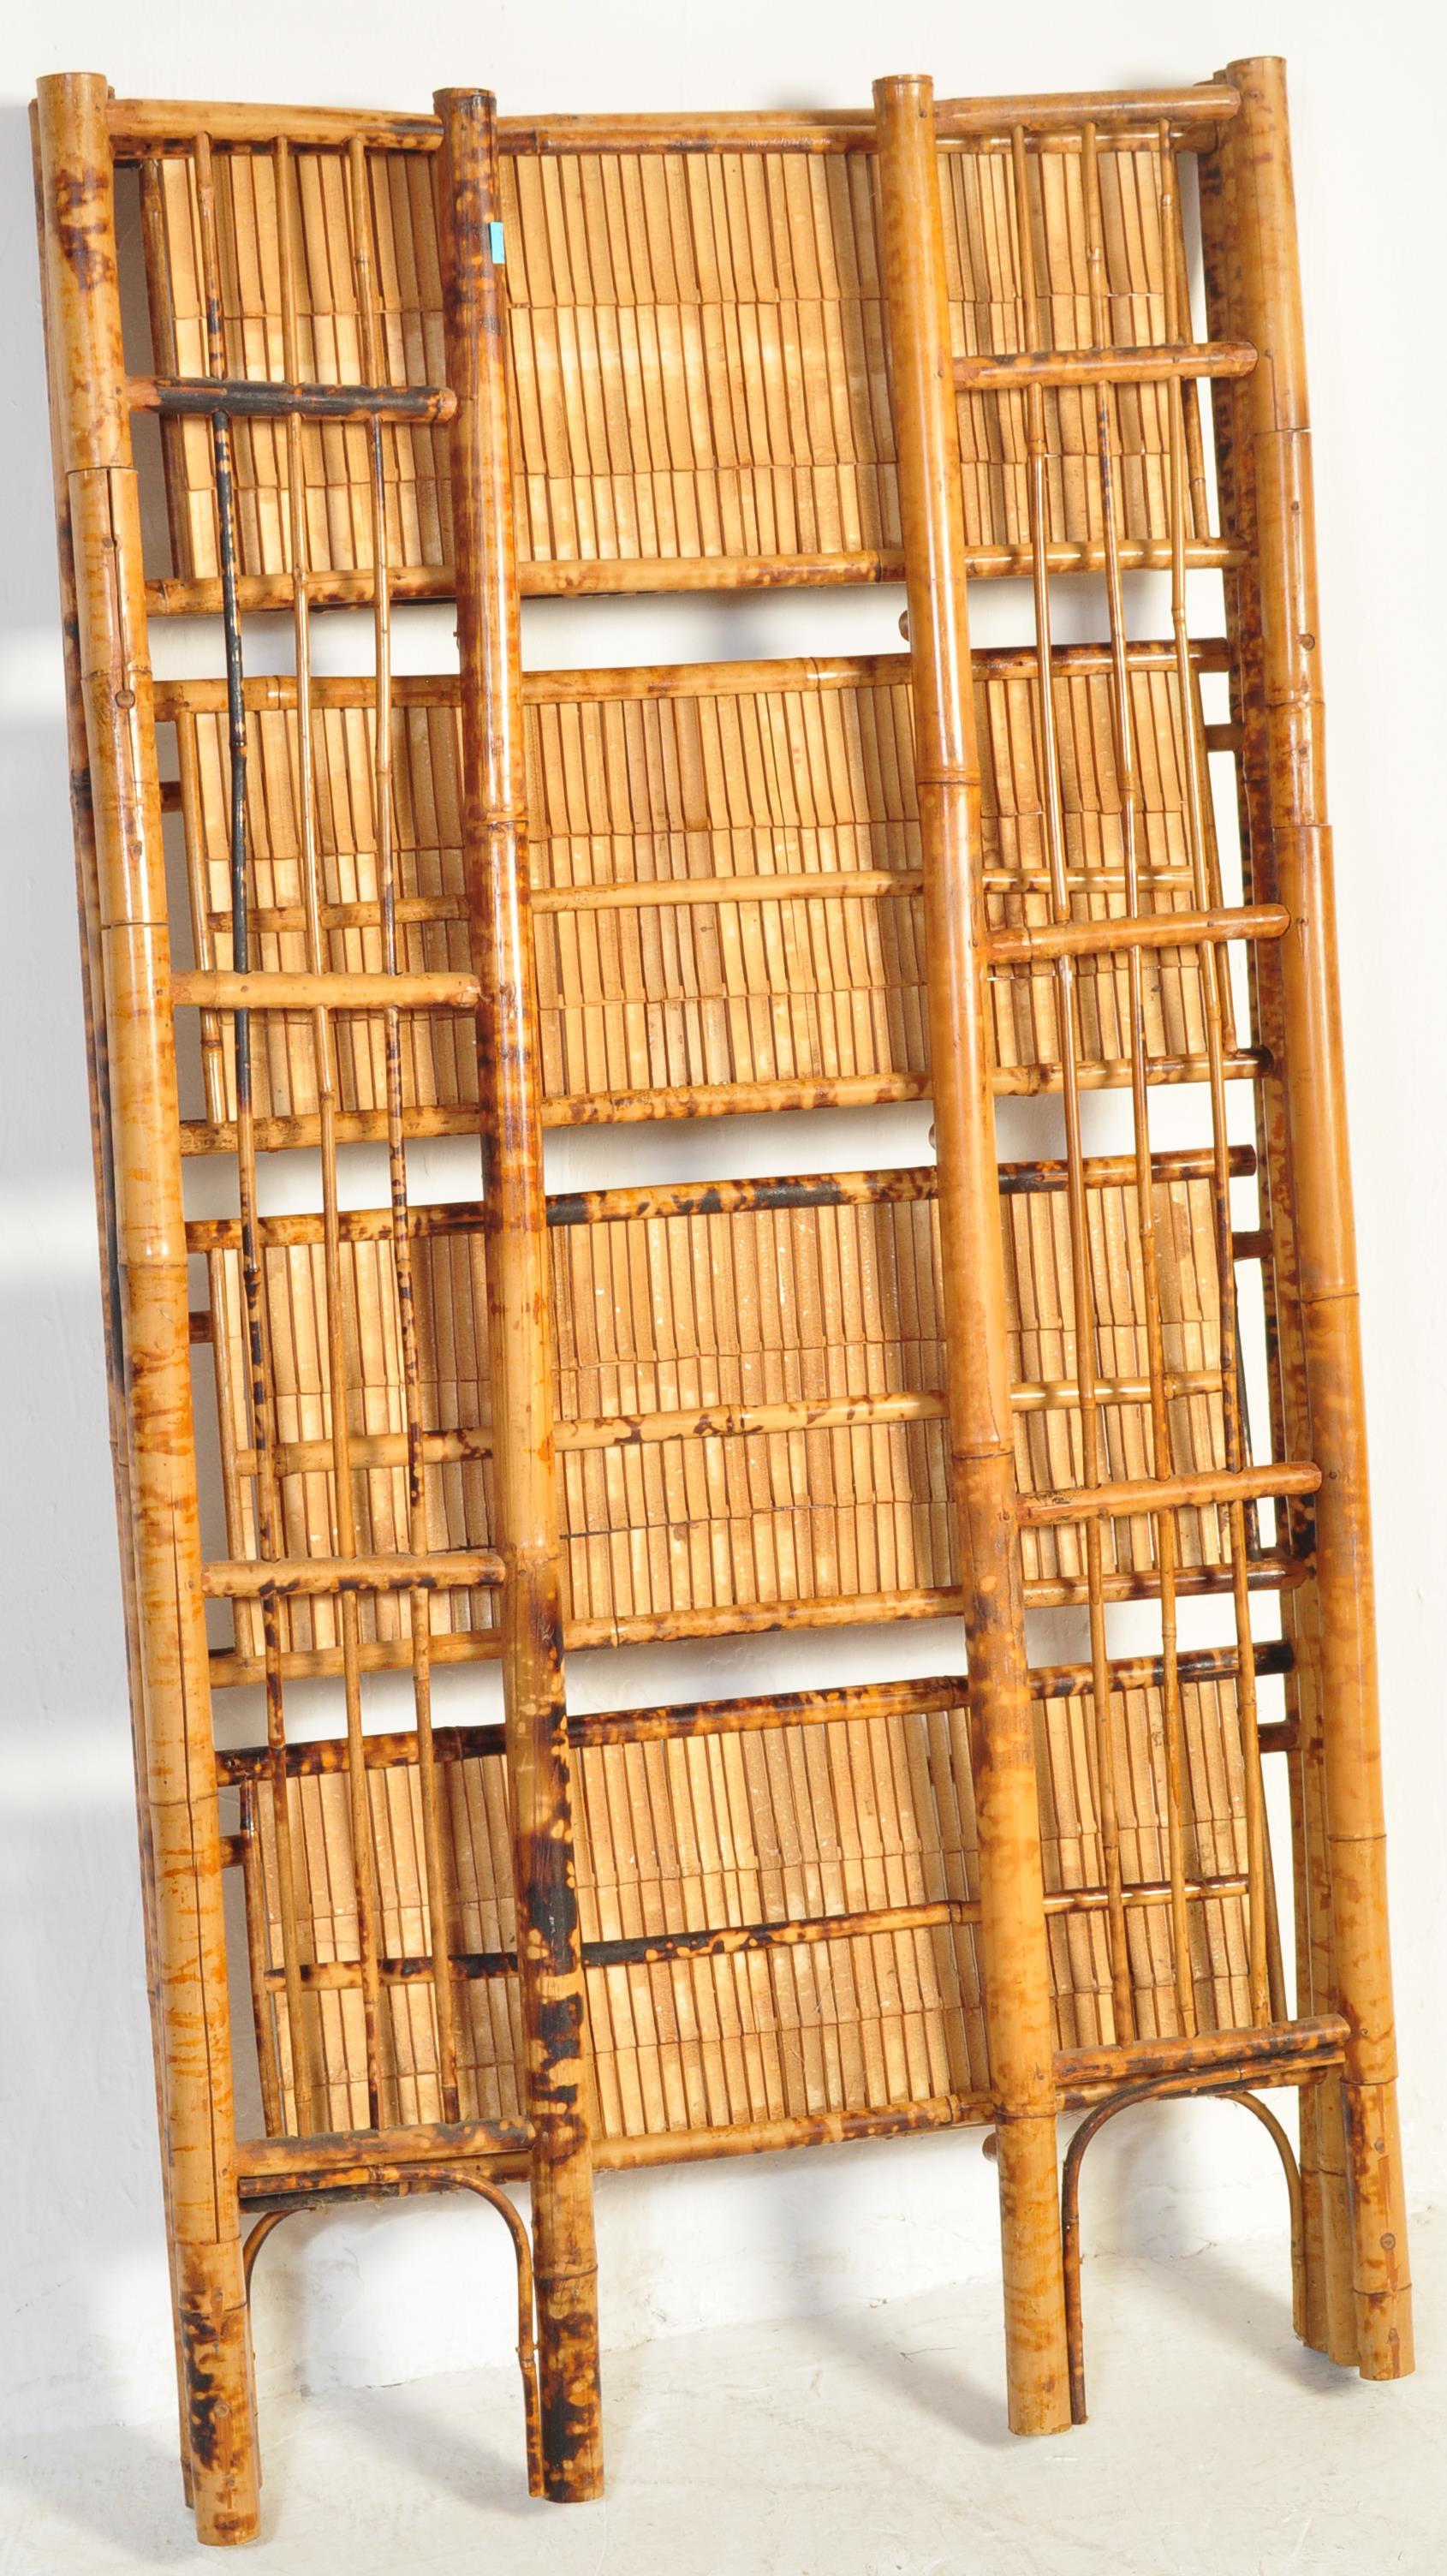 EARLY 20TH CENTURY AESTHETIC MOVEMENT BAMBOO SHELVES - Image 6 of 6